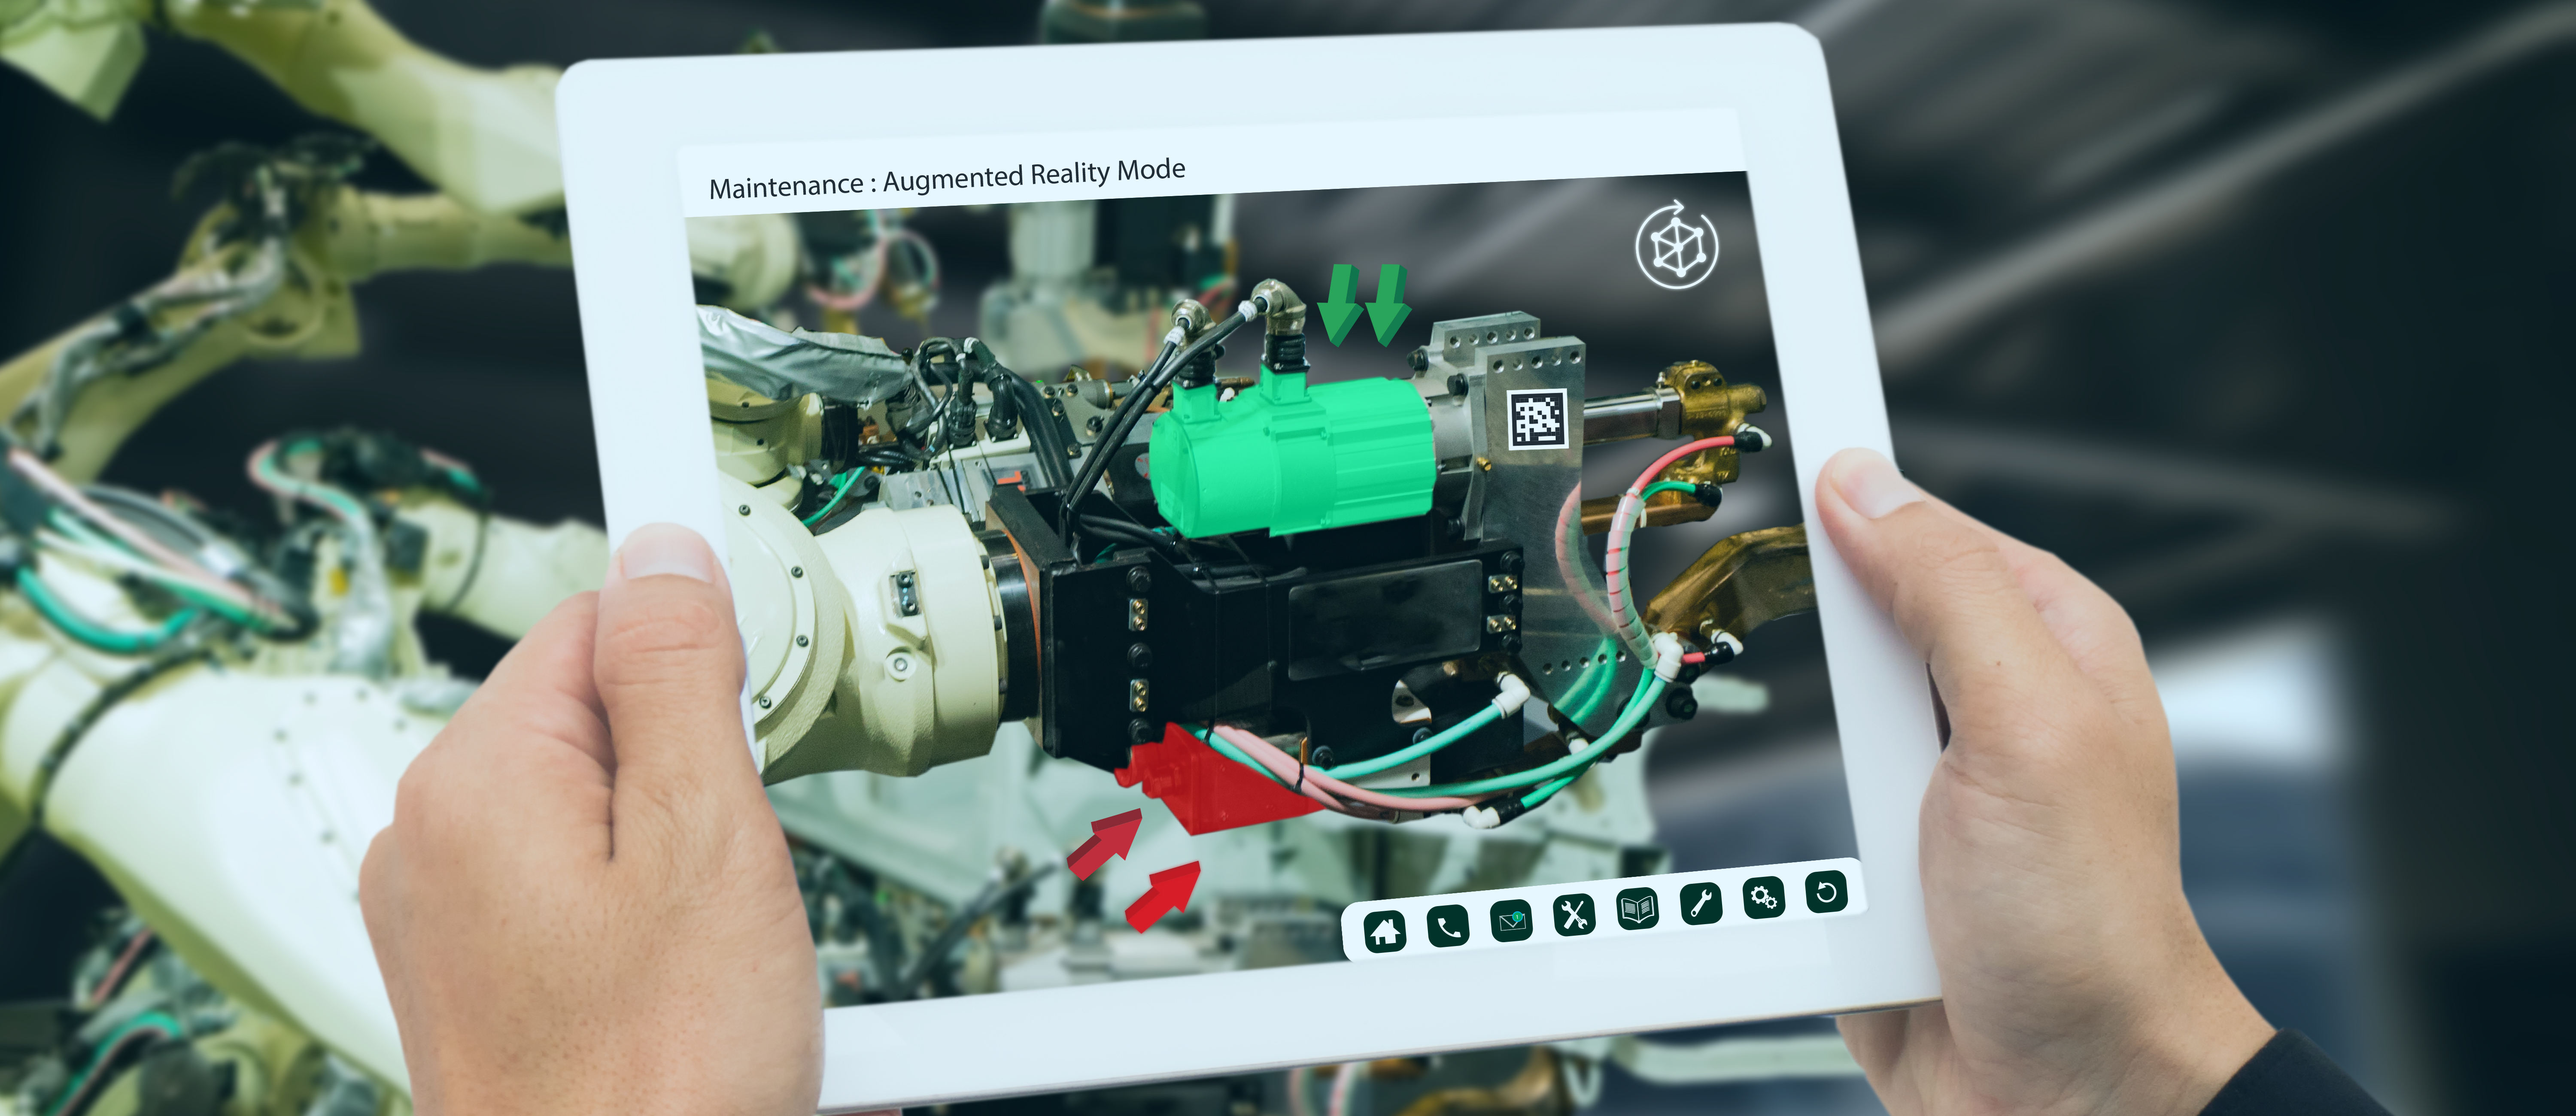 Augmented Reality and Automotive Industry – Usage, Benefits & More